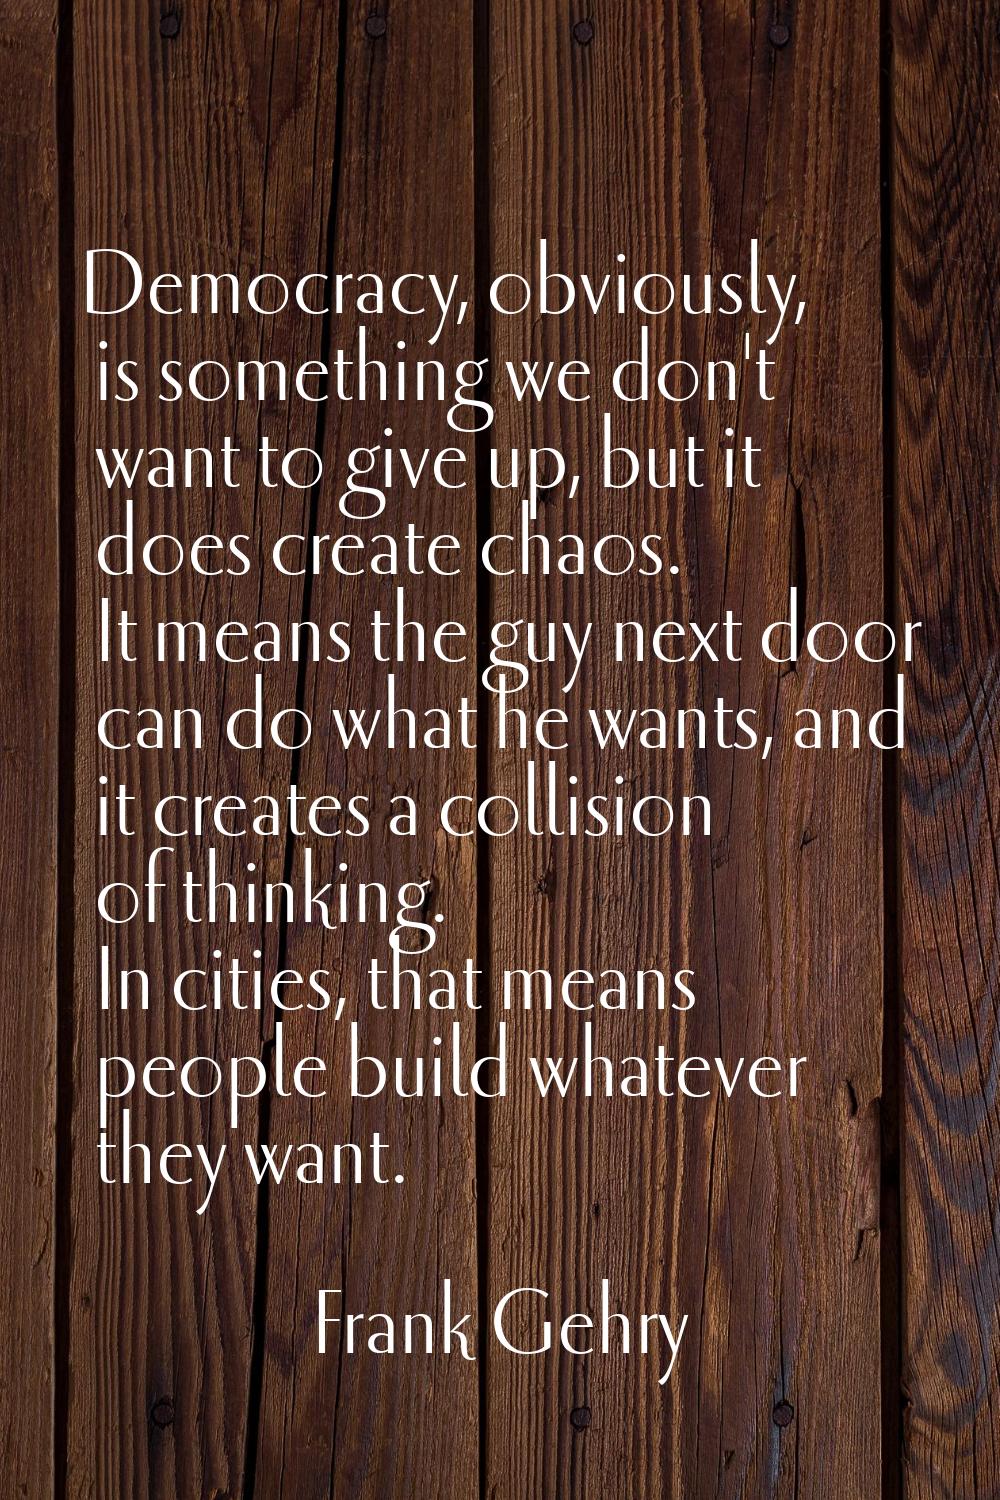 Democracy, obviously, is something we don't want to give up, but it does create chaos. It means the